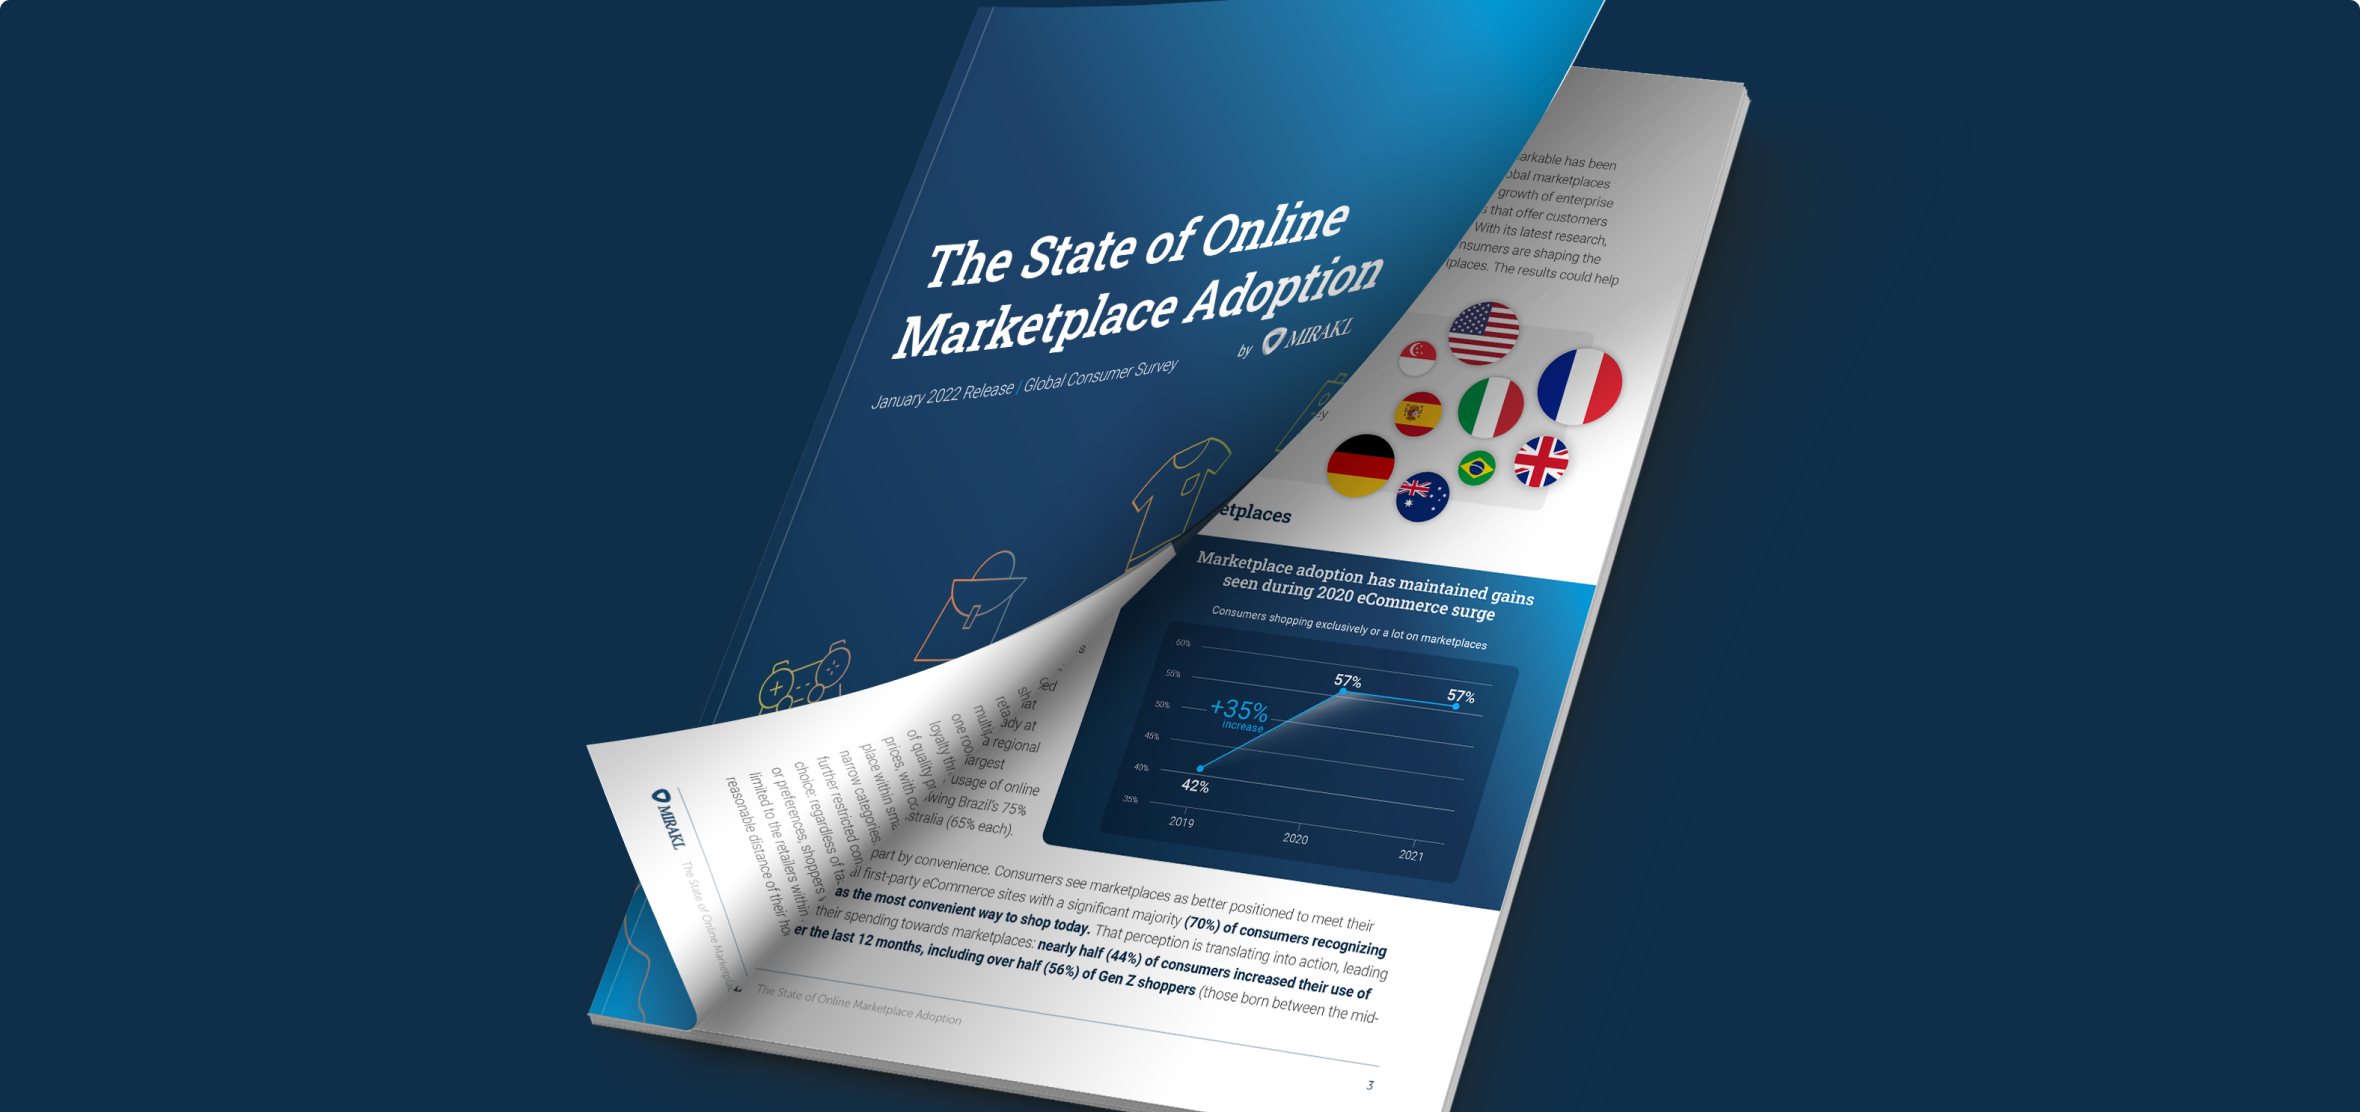 Consumer Survey: The State of Online Marketplace Adoption by Mirakl